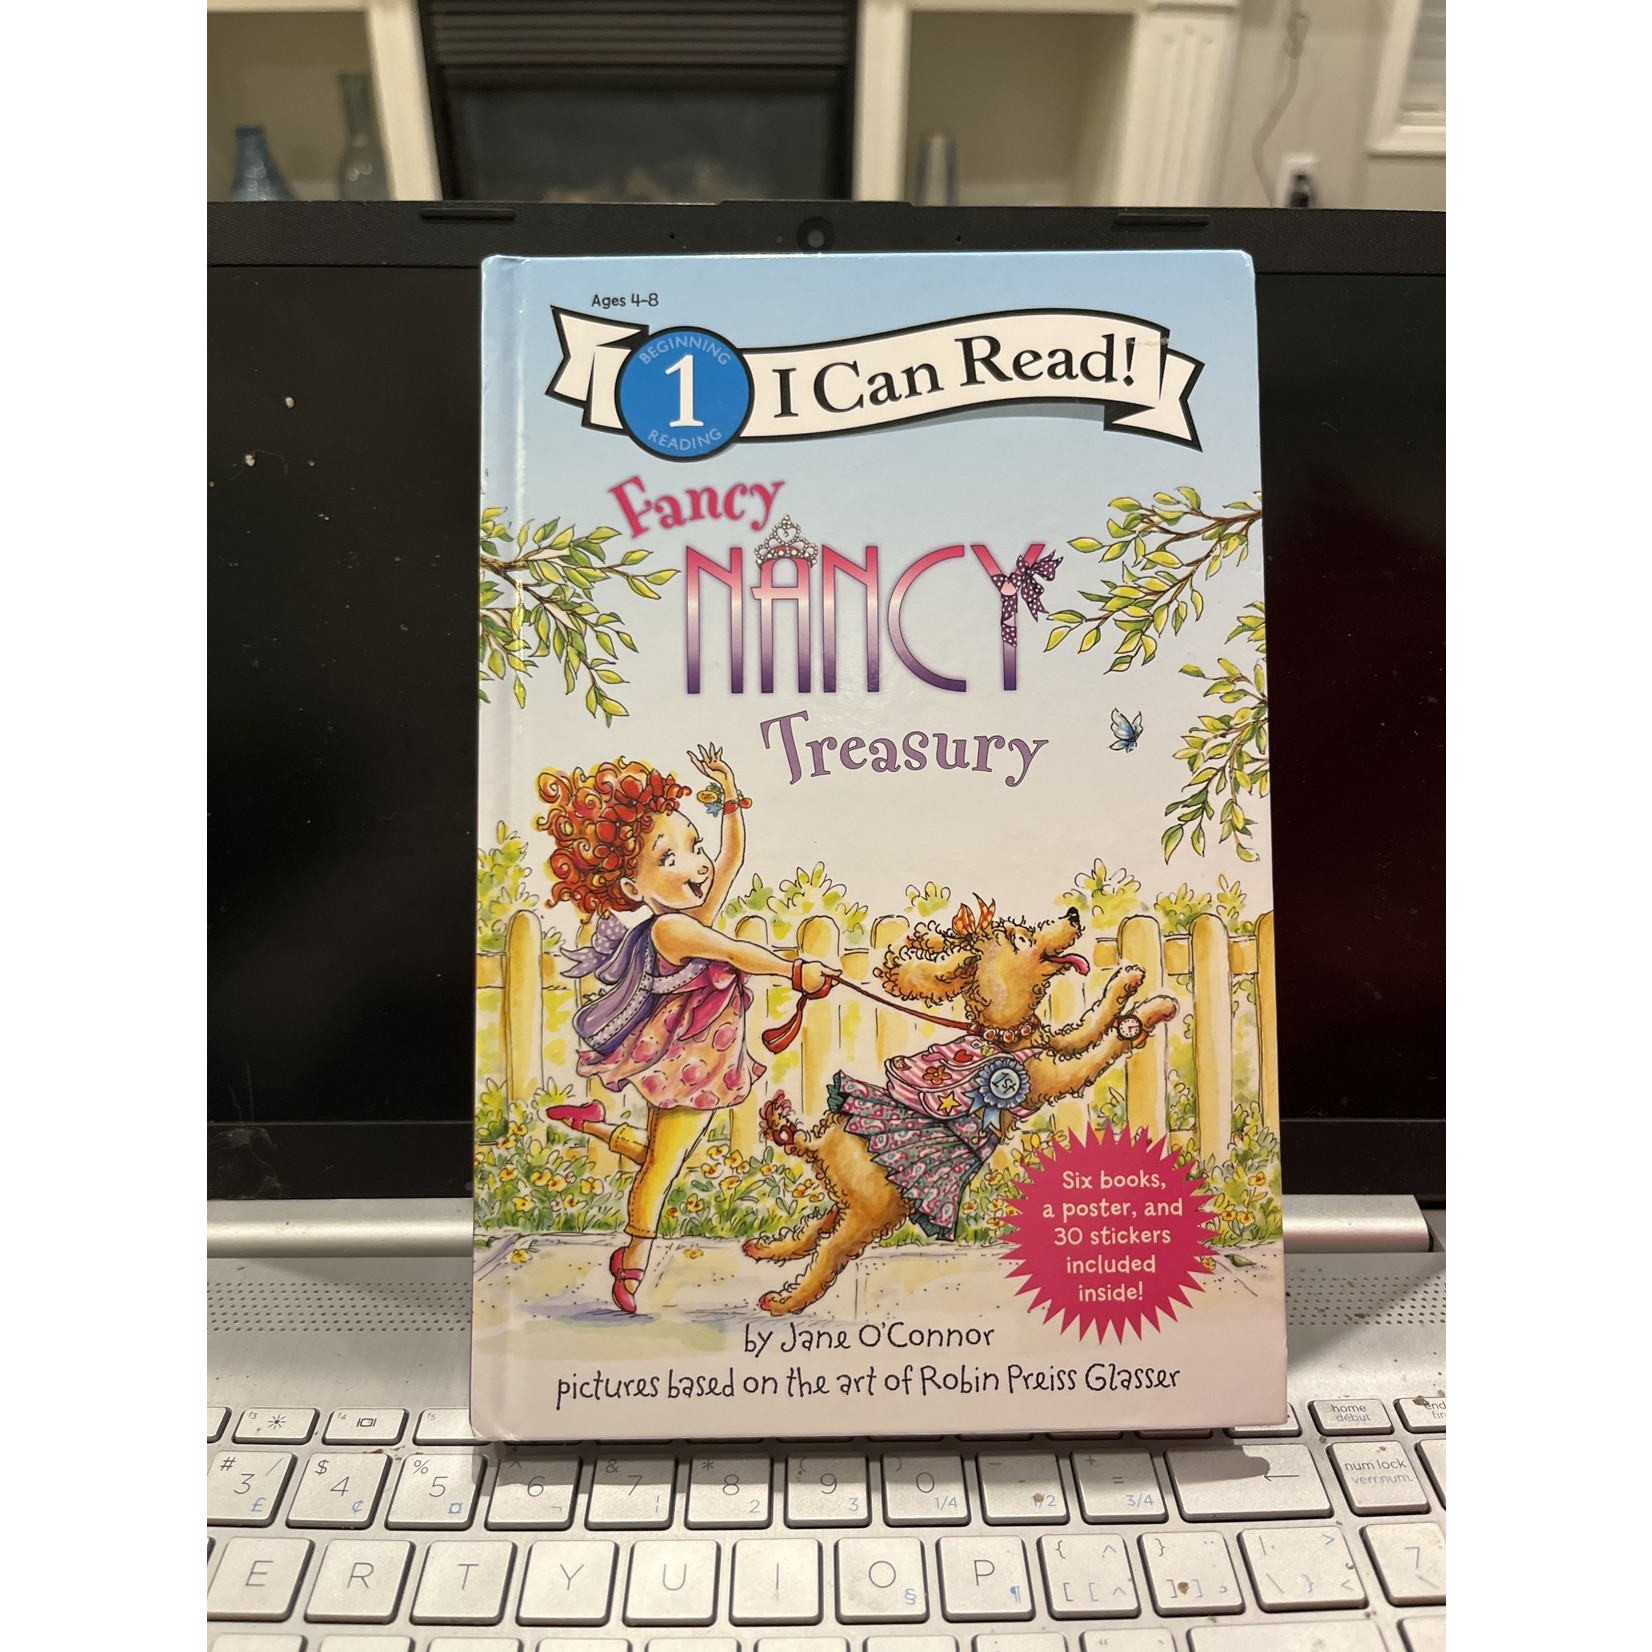 Fancy Nancy Treasury, I Can Read Level 1 - Six Books, a poster, and 30 Stickers Included